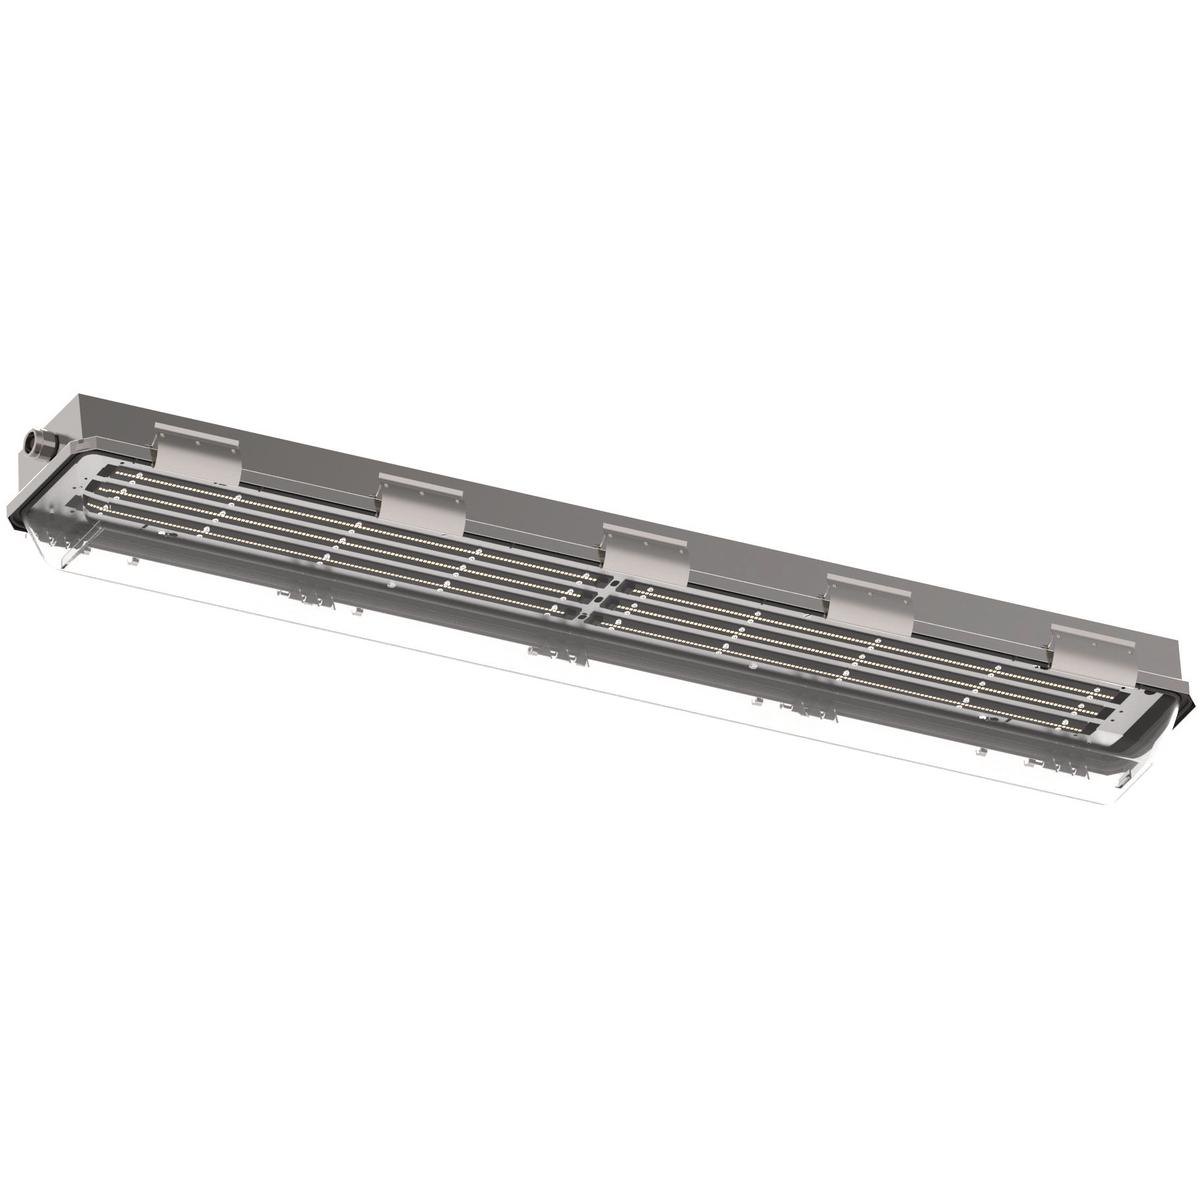 Hubbell LZ2SL2834 LZ2SL Series Linear LED fixtures are made of a 316 Stainless Steel body with an impact resistant polycarbonate lens and use energy efficient LED's  that are suitable for use in harsh and hazardous environments.  ; Supplemental 20KA/10KV Surge Protection i